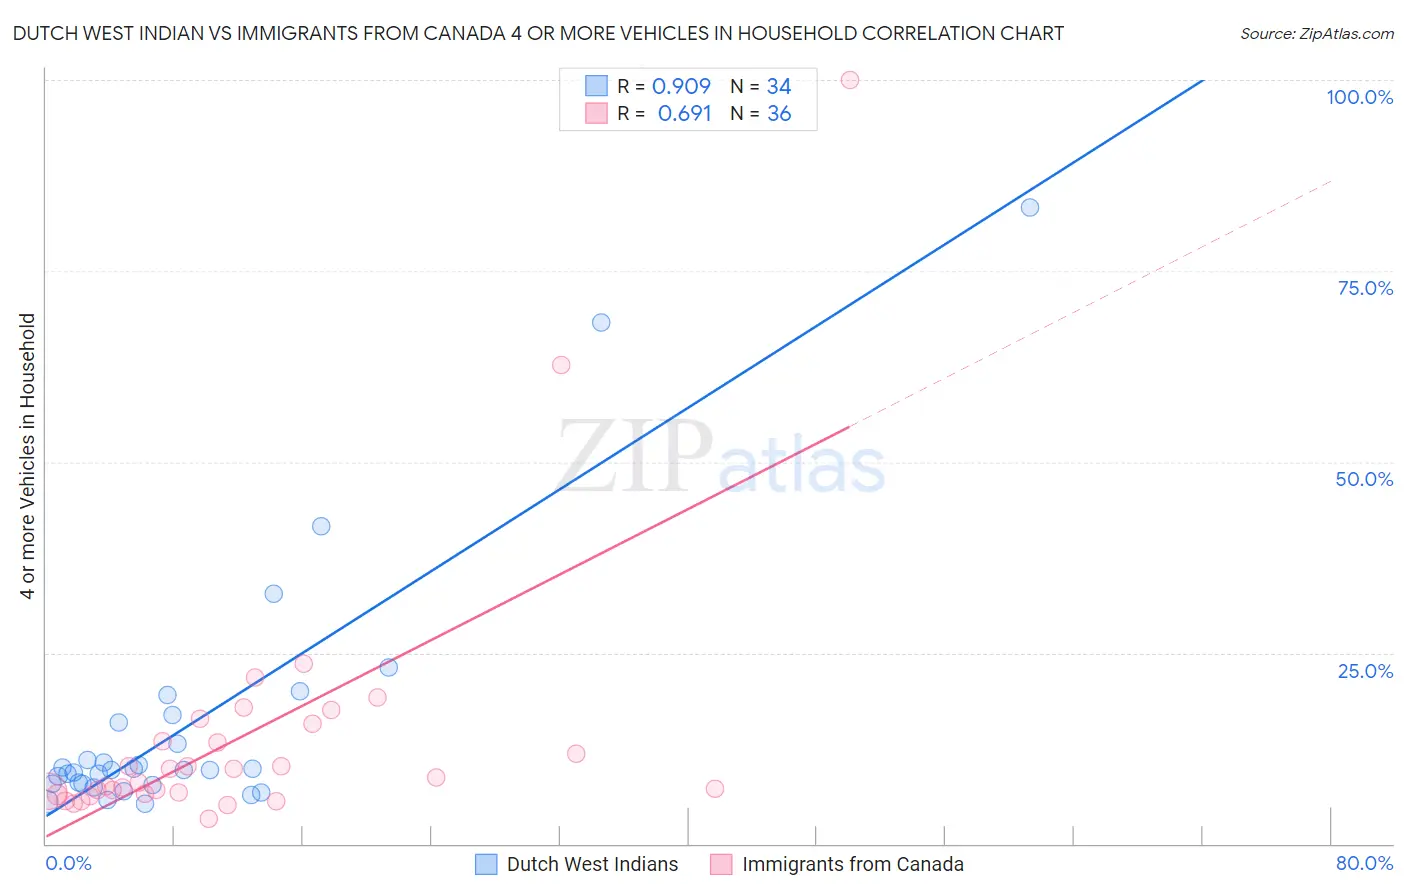 Dutch West Indian vs Immigrants from Canada 4 or more Vehicles in Household